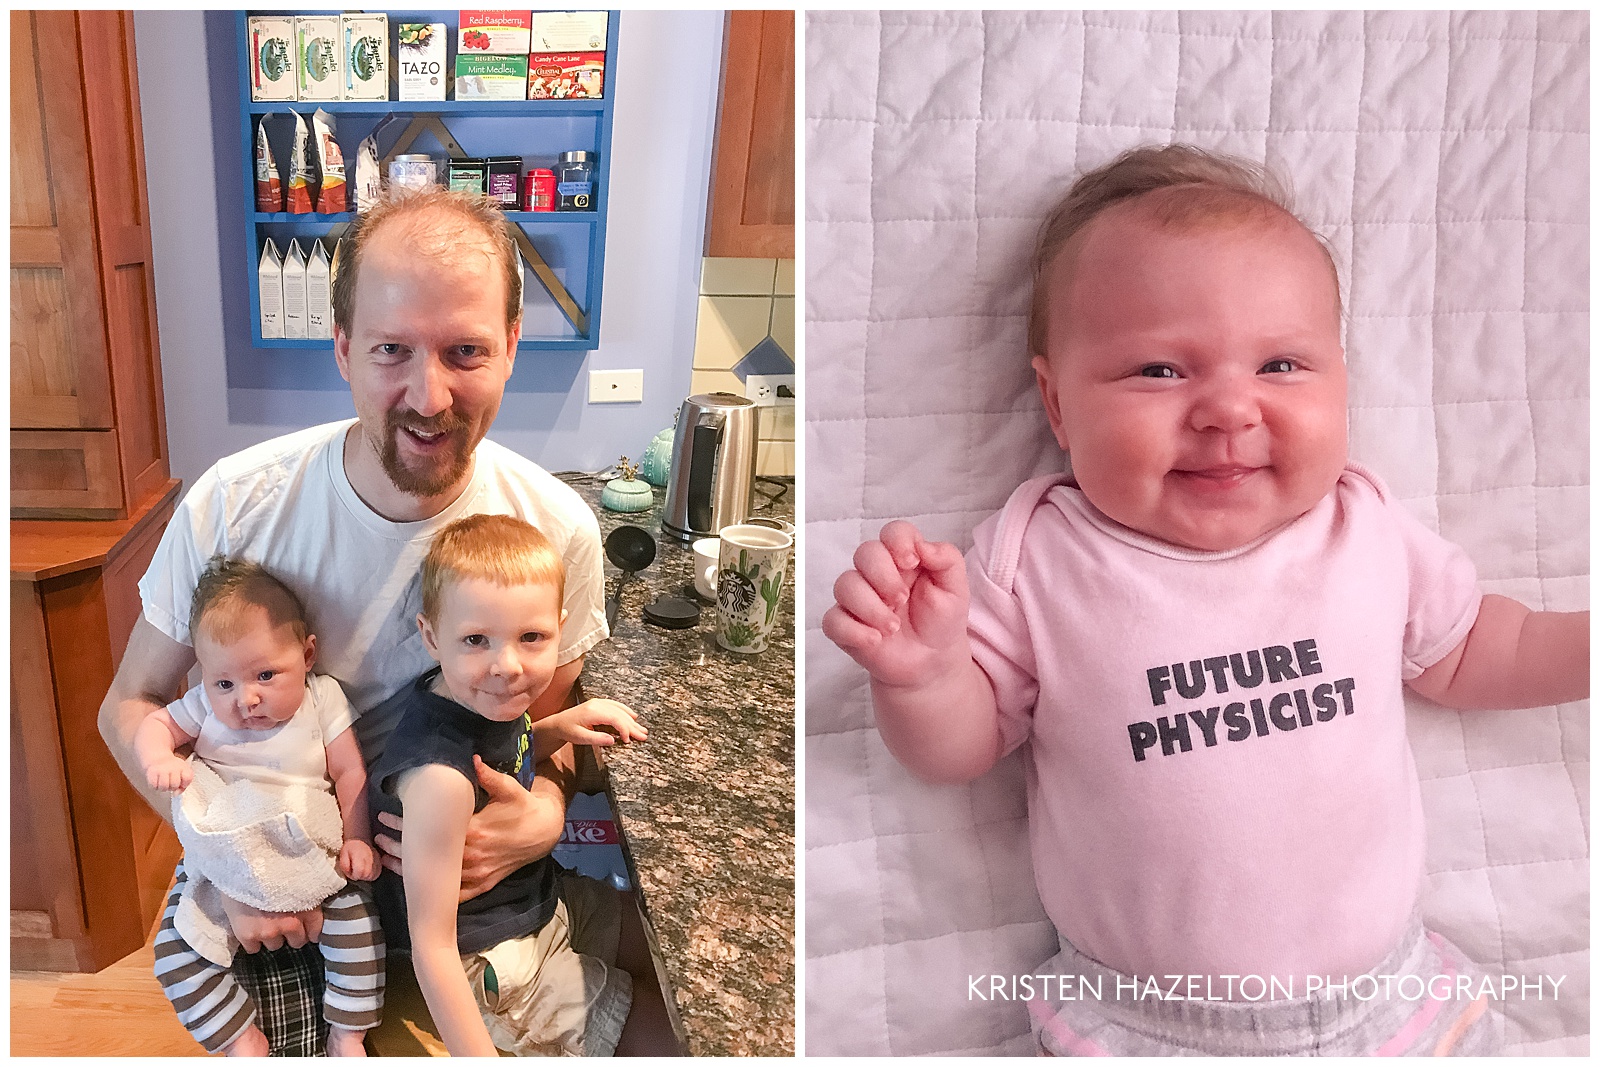 A father holding his young son and baby daughter, and a smiling baby wearing a "future physicist" onesie